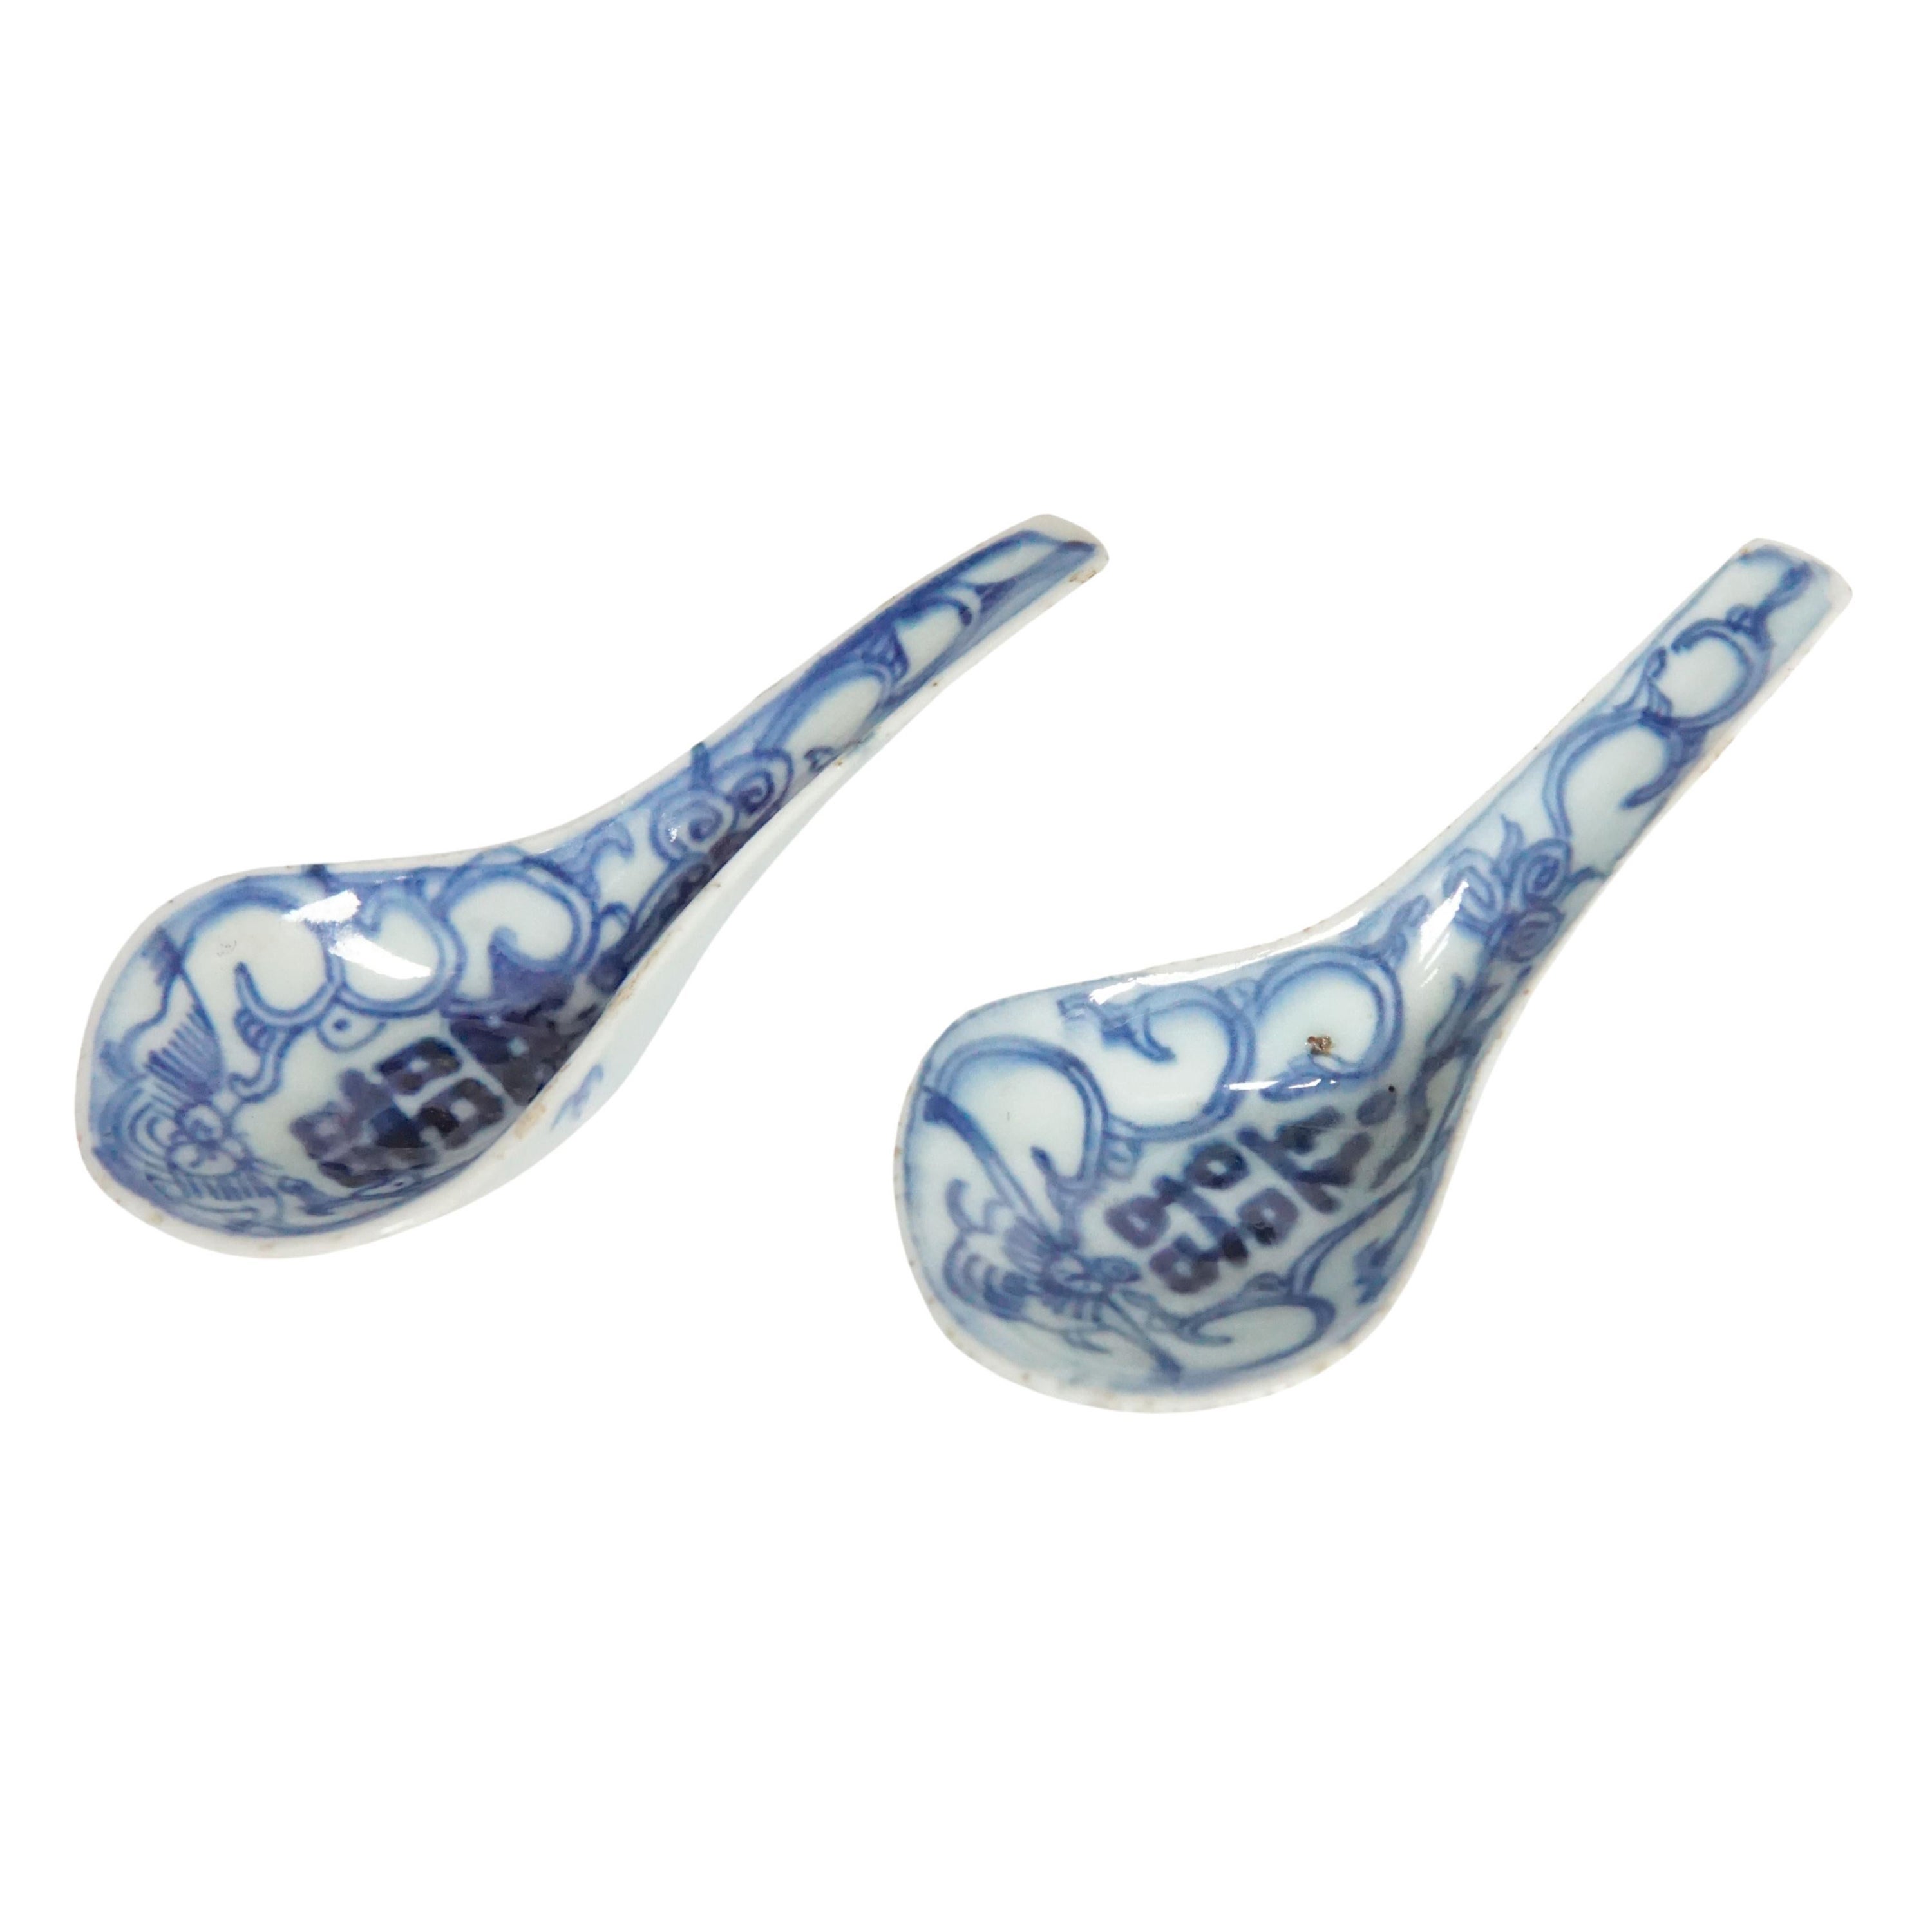 Pair of White & Blue Chinese Ceramic / Porcelain Spoons, Double Happiness For Sale